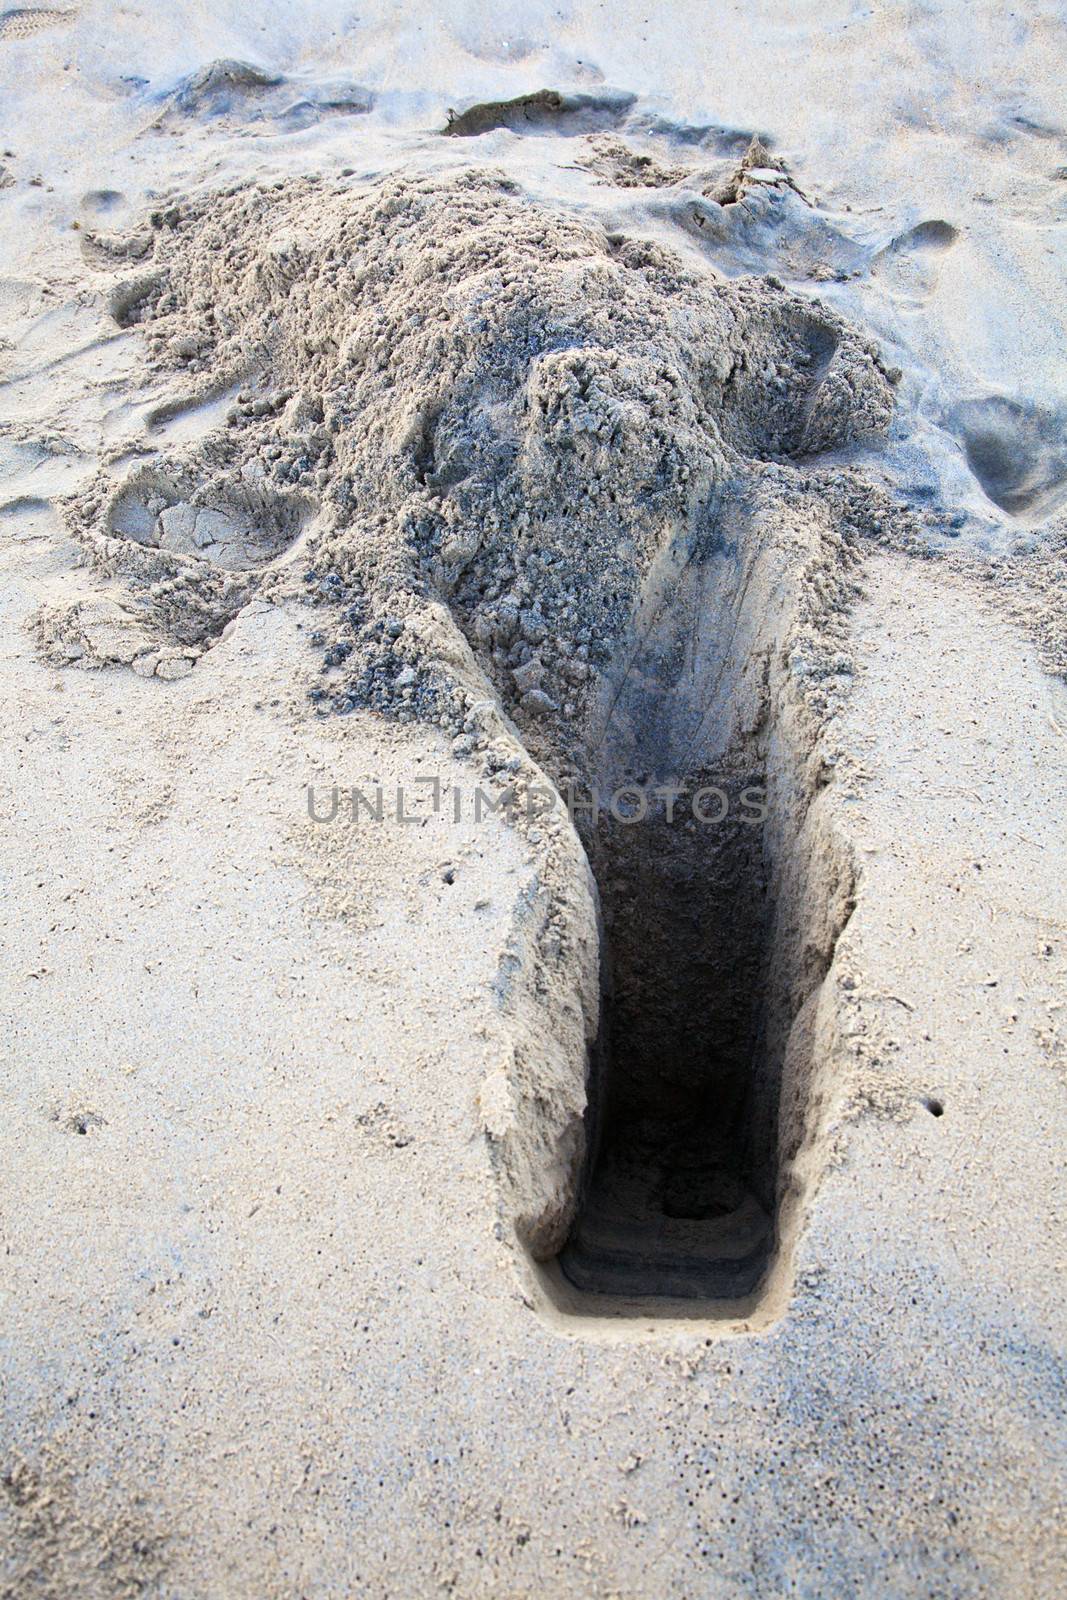 Vertical color capture of holes dug on a sandy beach in Pondicherry India by crab catchers during low tide to snare and trap crabs for local markets